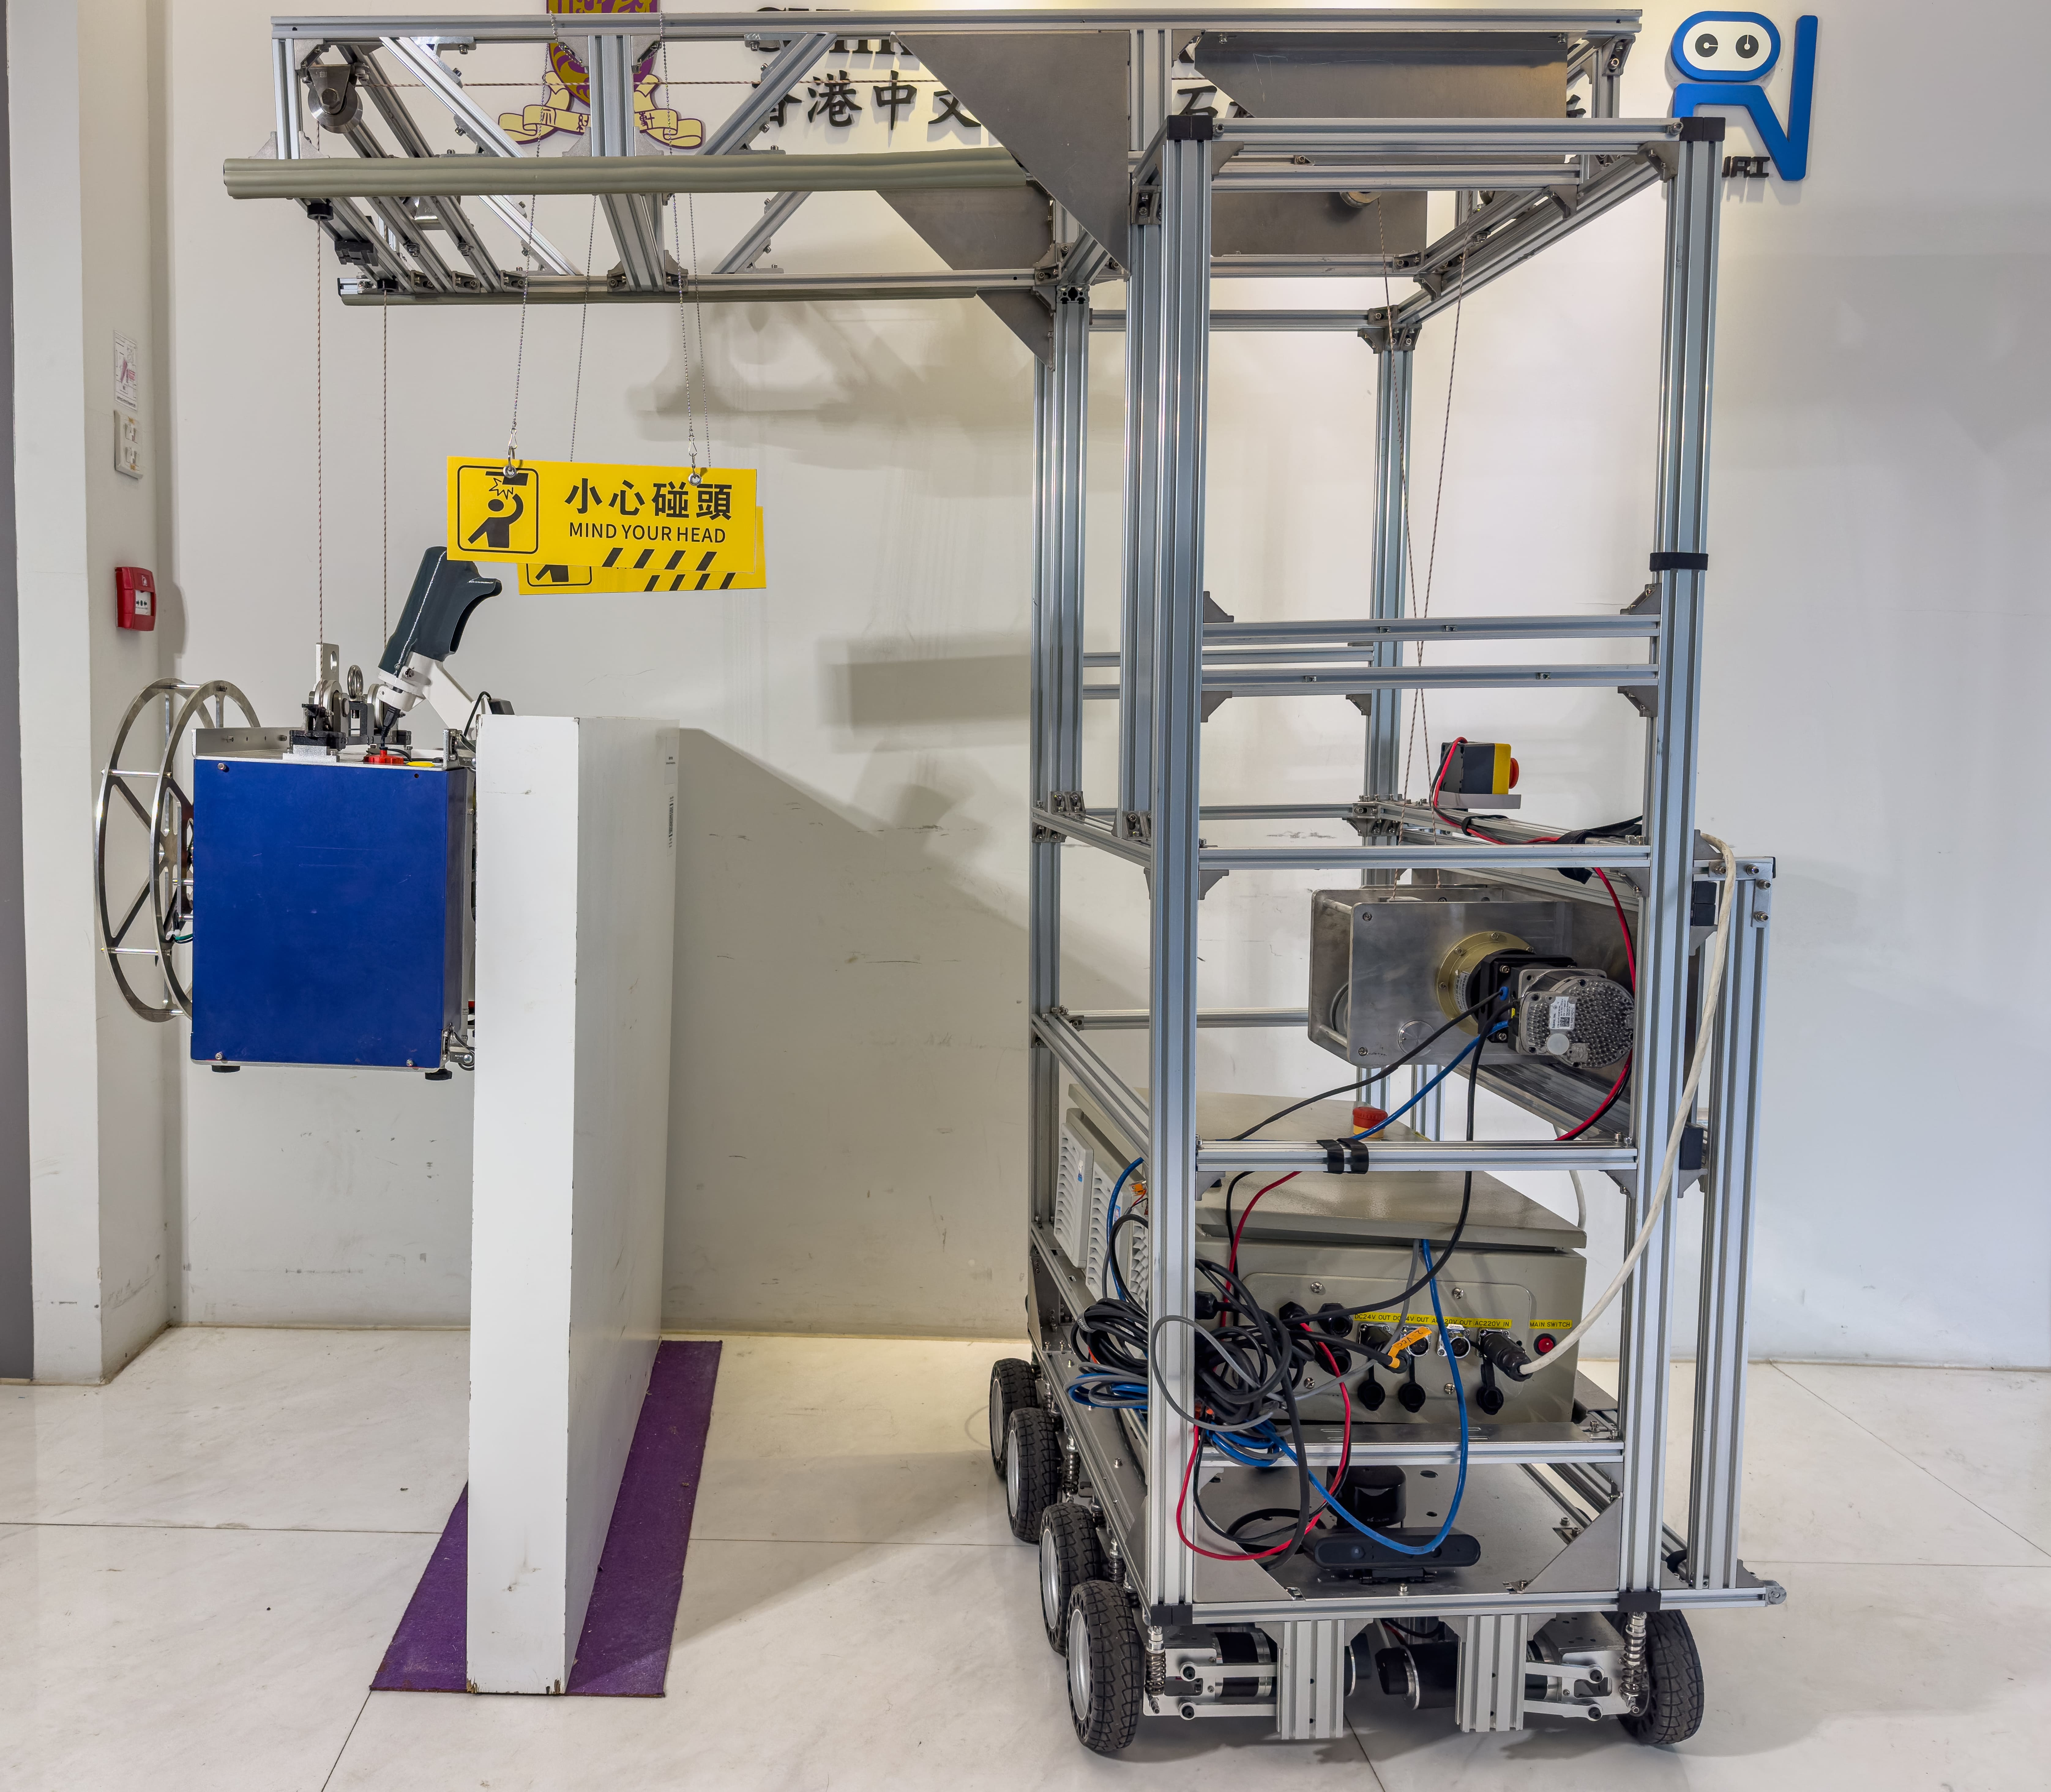 Robo-Tapper: Cable-driven Inspection Robot for High-rise Building Façade